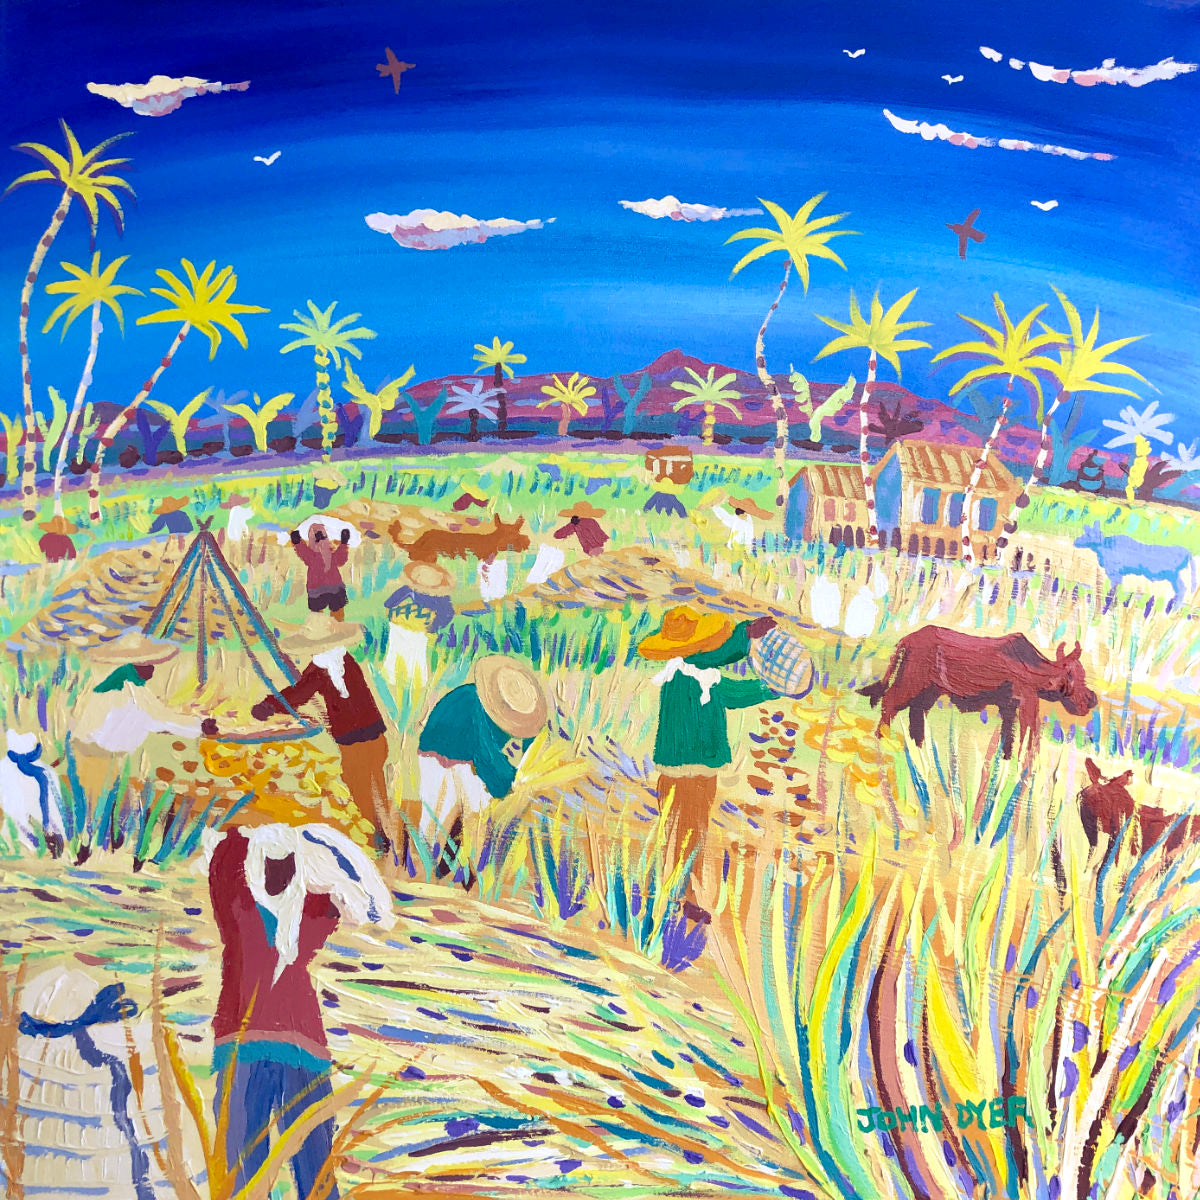 &#39;Winnowing in the Wind, the Philippines Rice Harvest&#39;. 24x24 inches acrylic on canvas. Paintings of Philippines by John Dyer from our Online Art Gallery